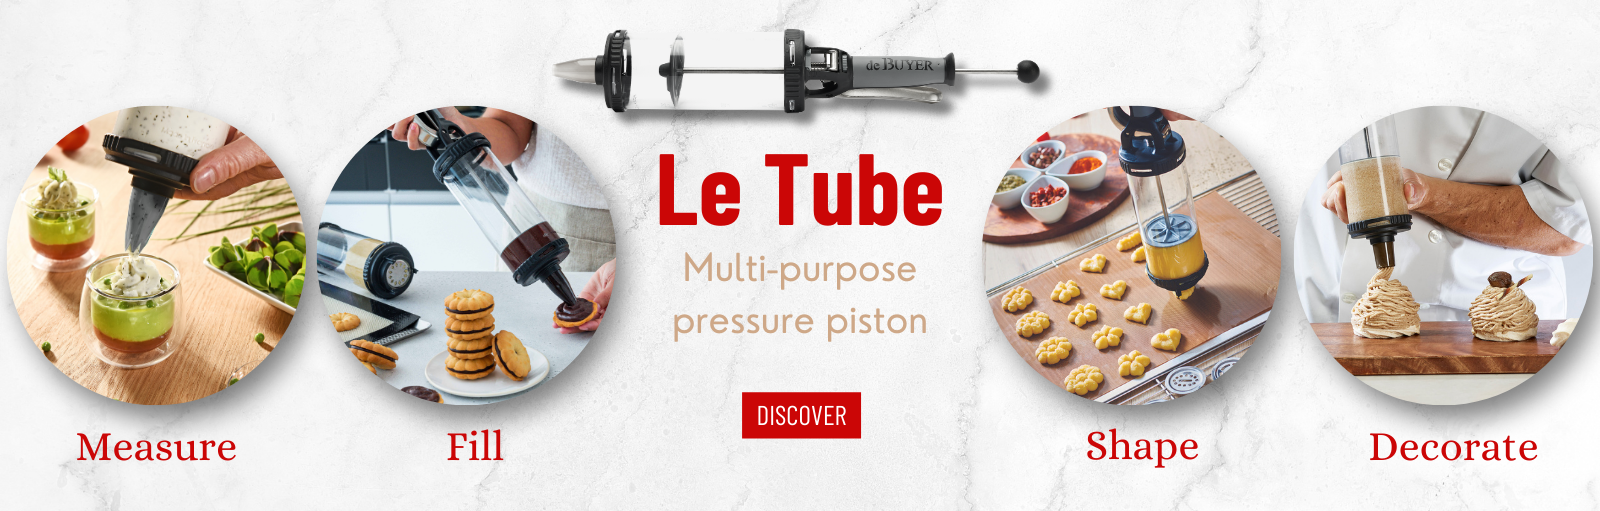 DE BUYER - How to use Le Tube (pressure pastry syringe) 